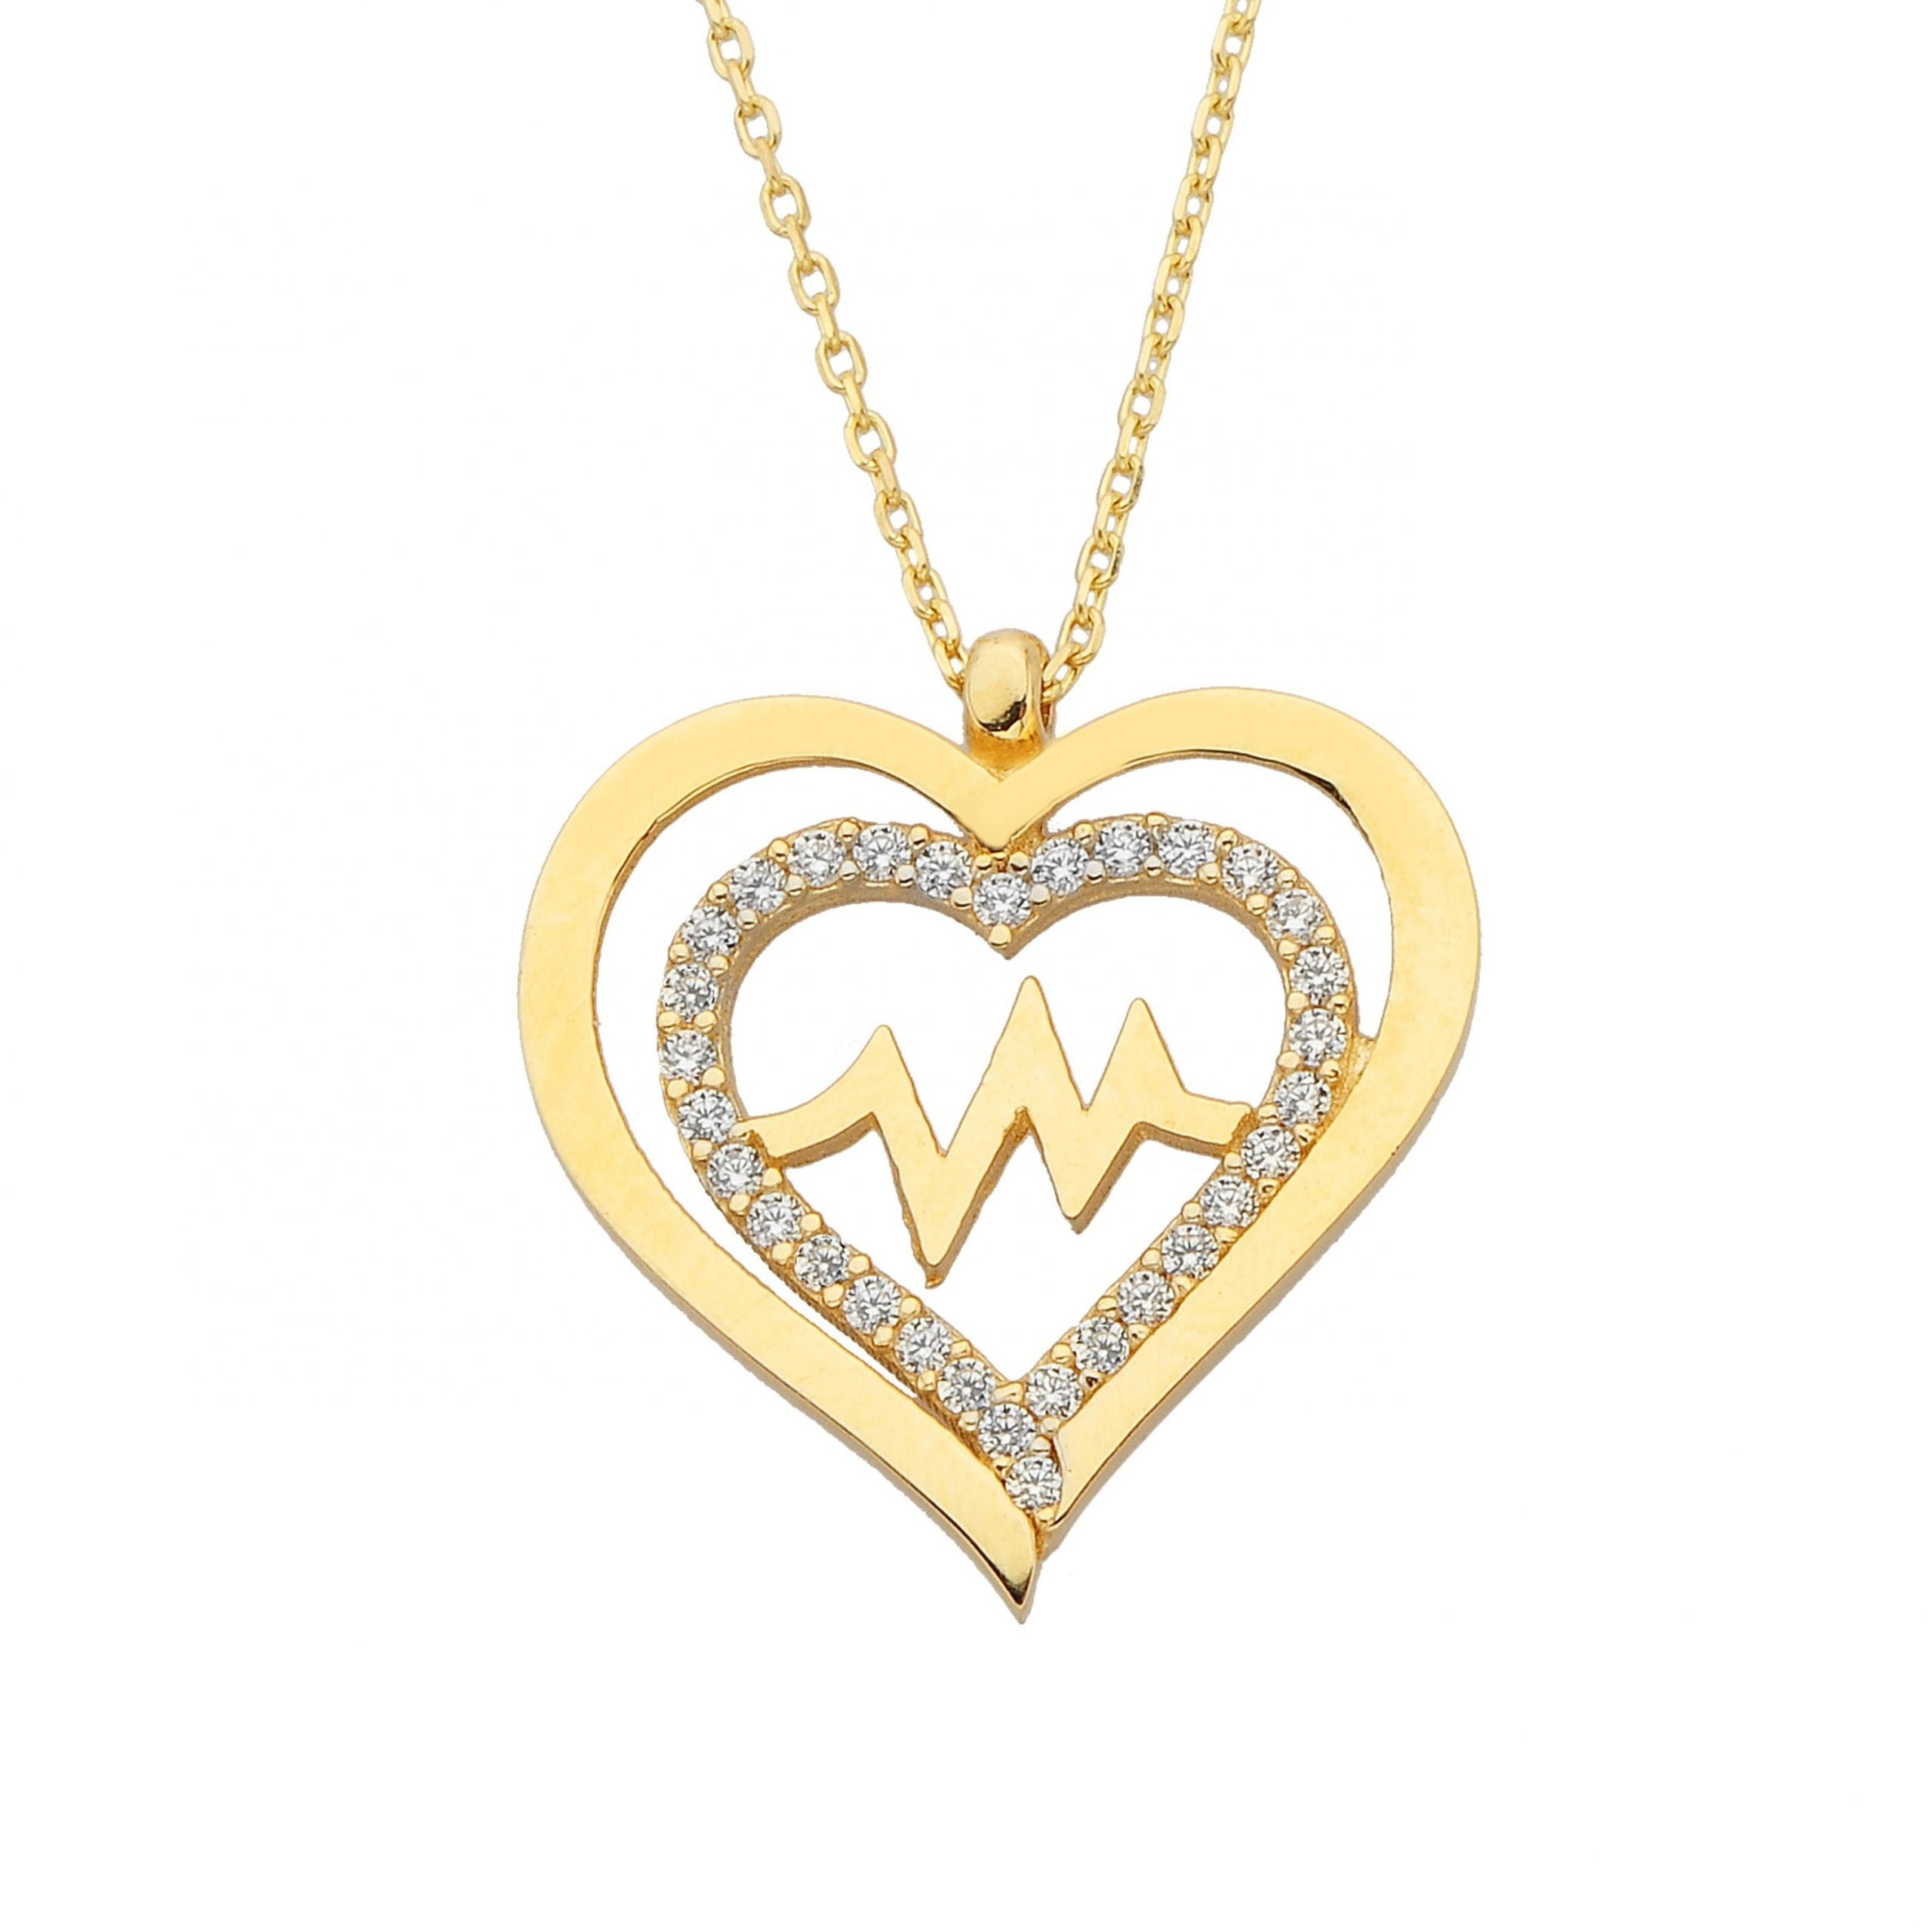 14K Pure Yellow/White Gold Heart Shaped Pendant Set With Cubic Zirconia 